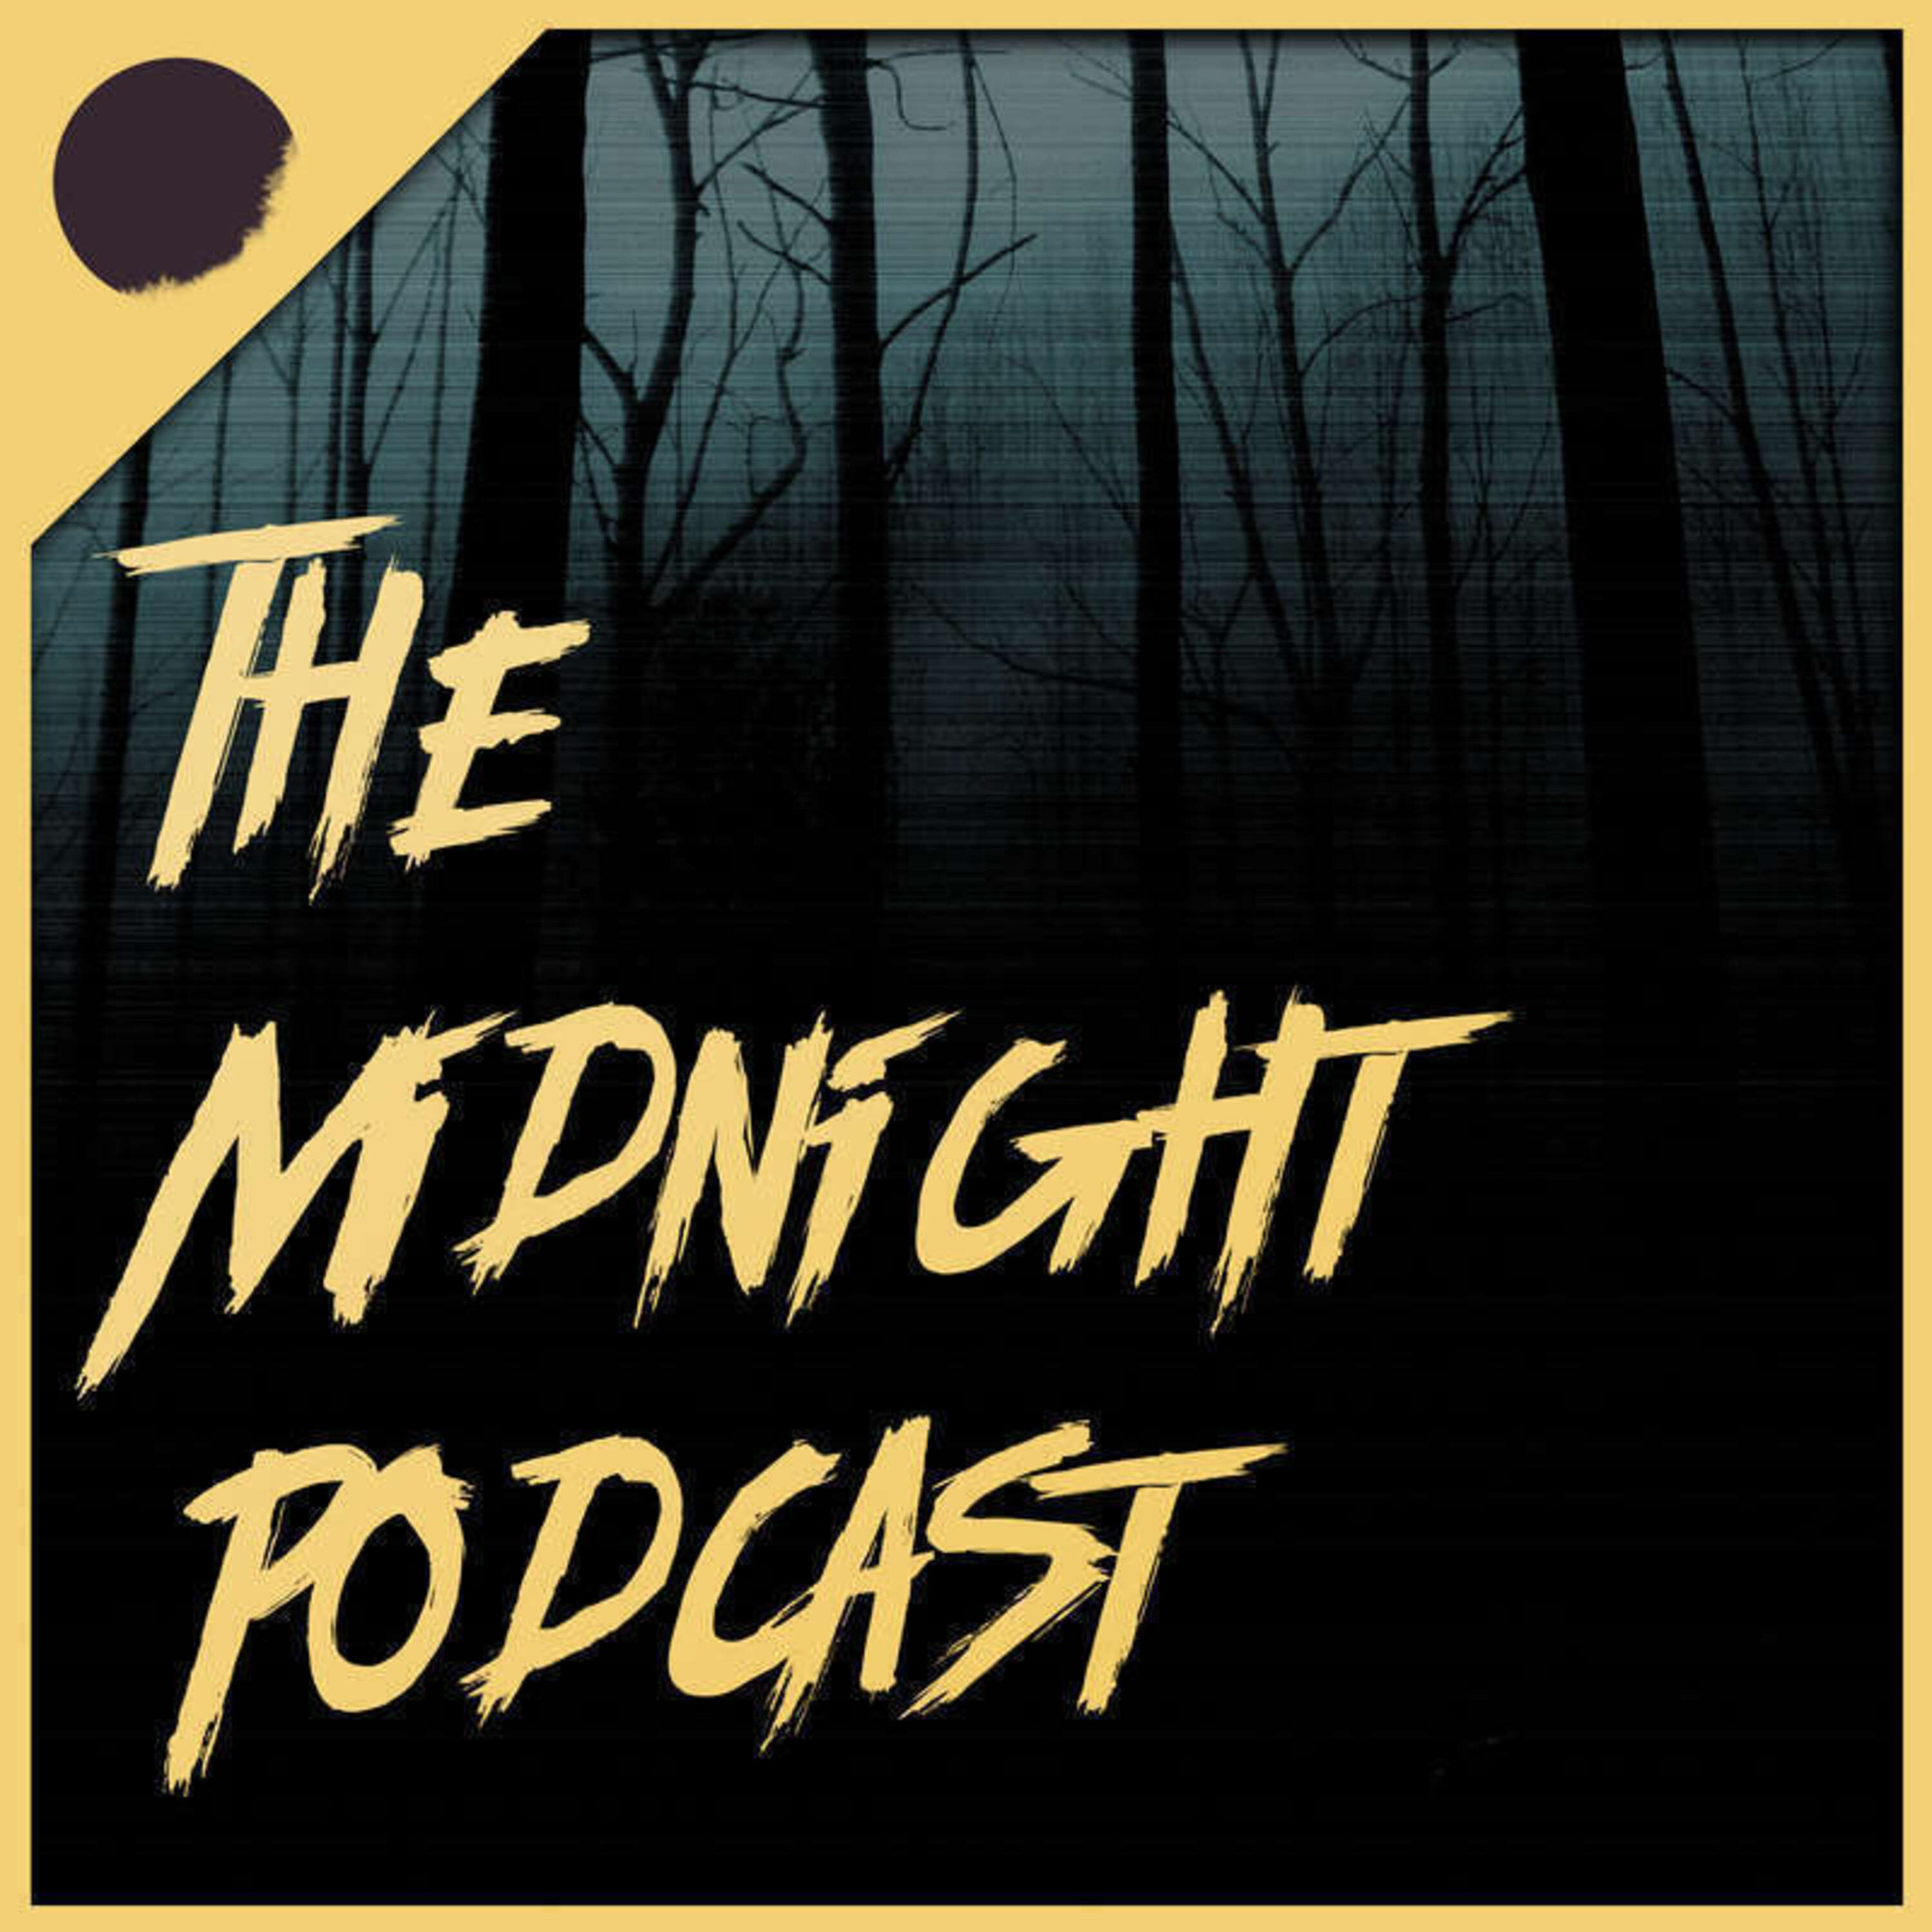 Episode 122 | There's a strange newspaper that's only delivered at midnight | Part 8